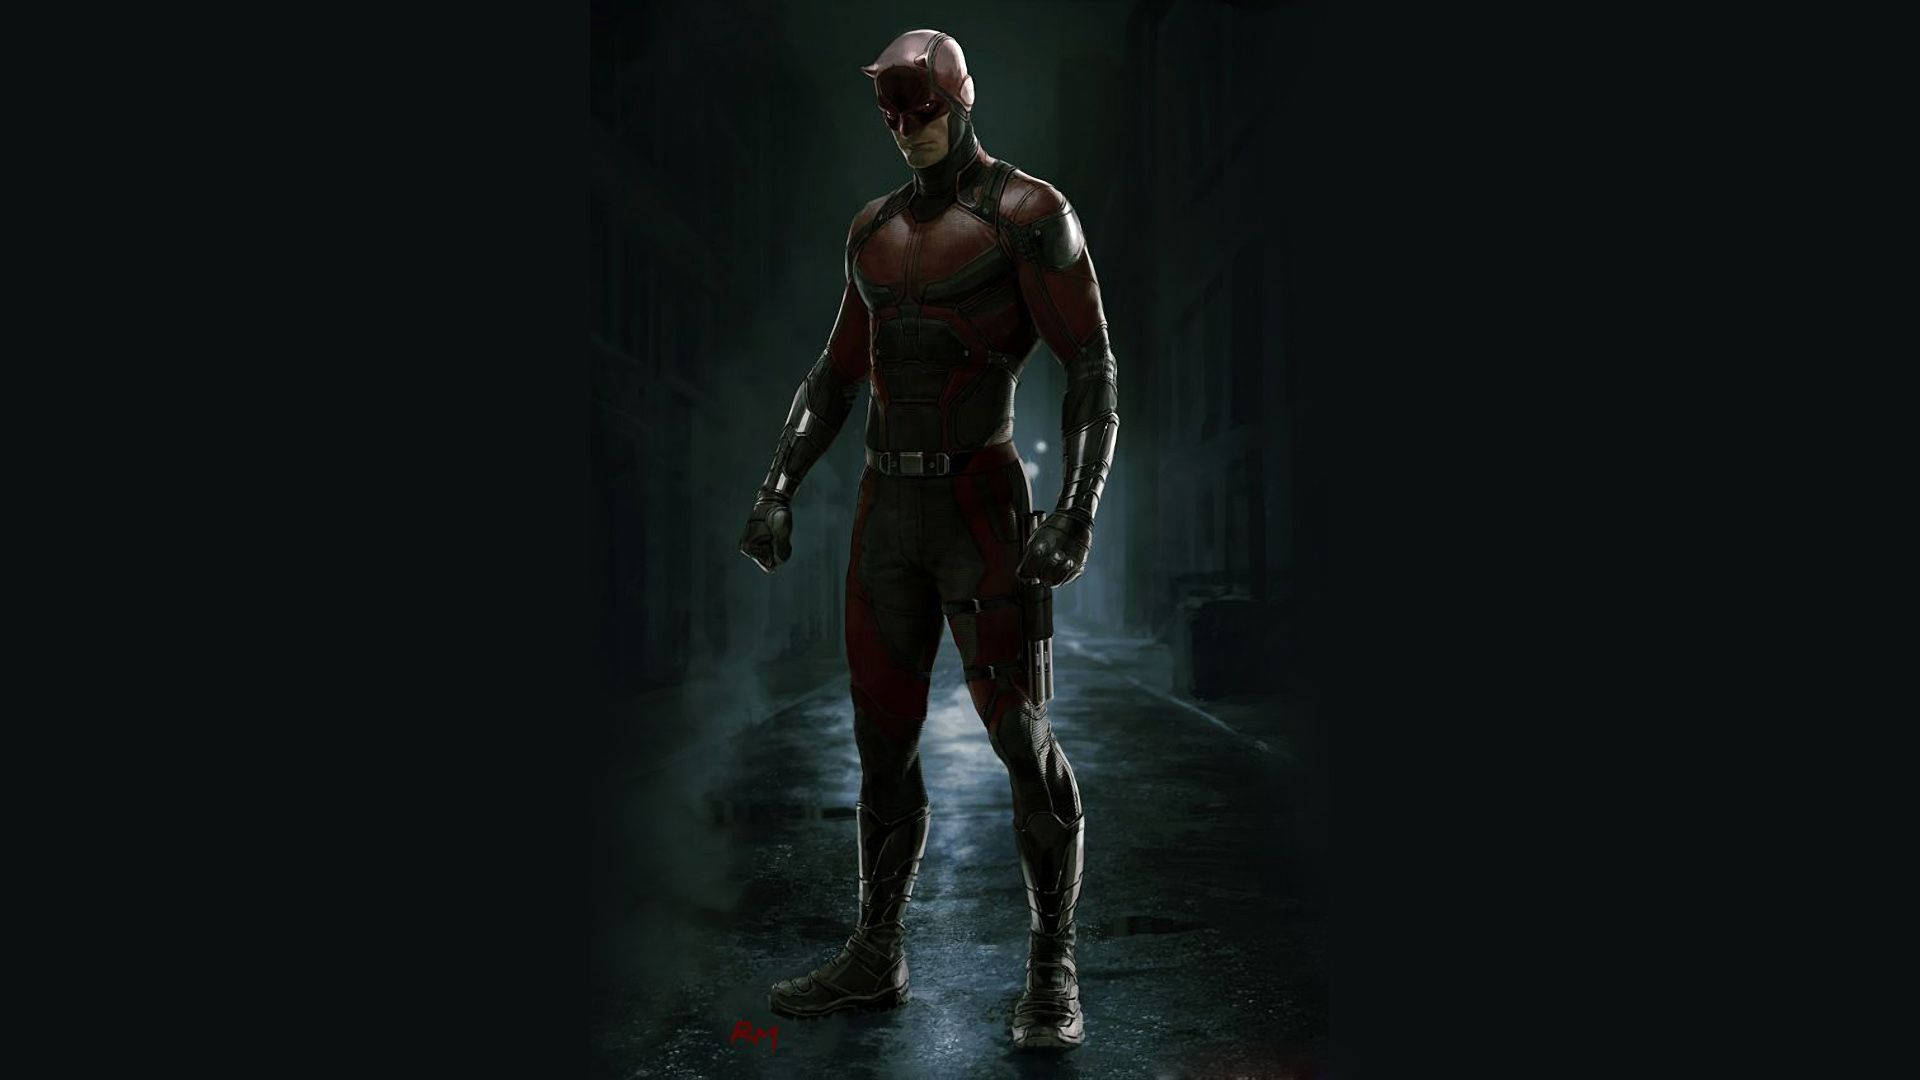 Daredevil Standing In A Dimly Lit Alley